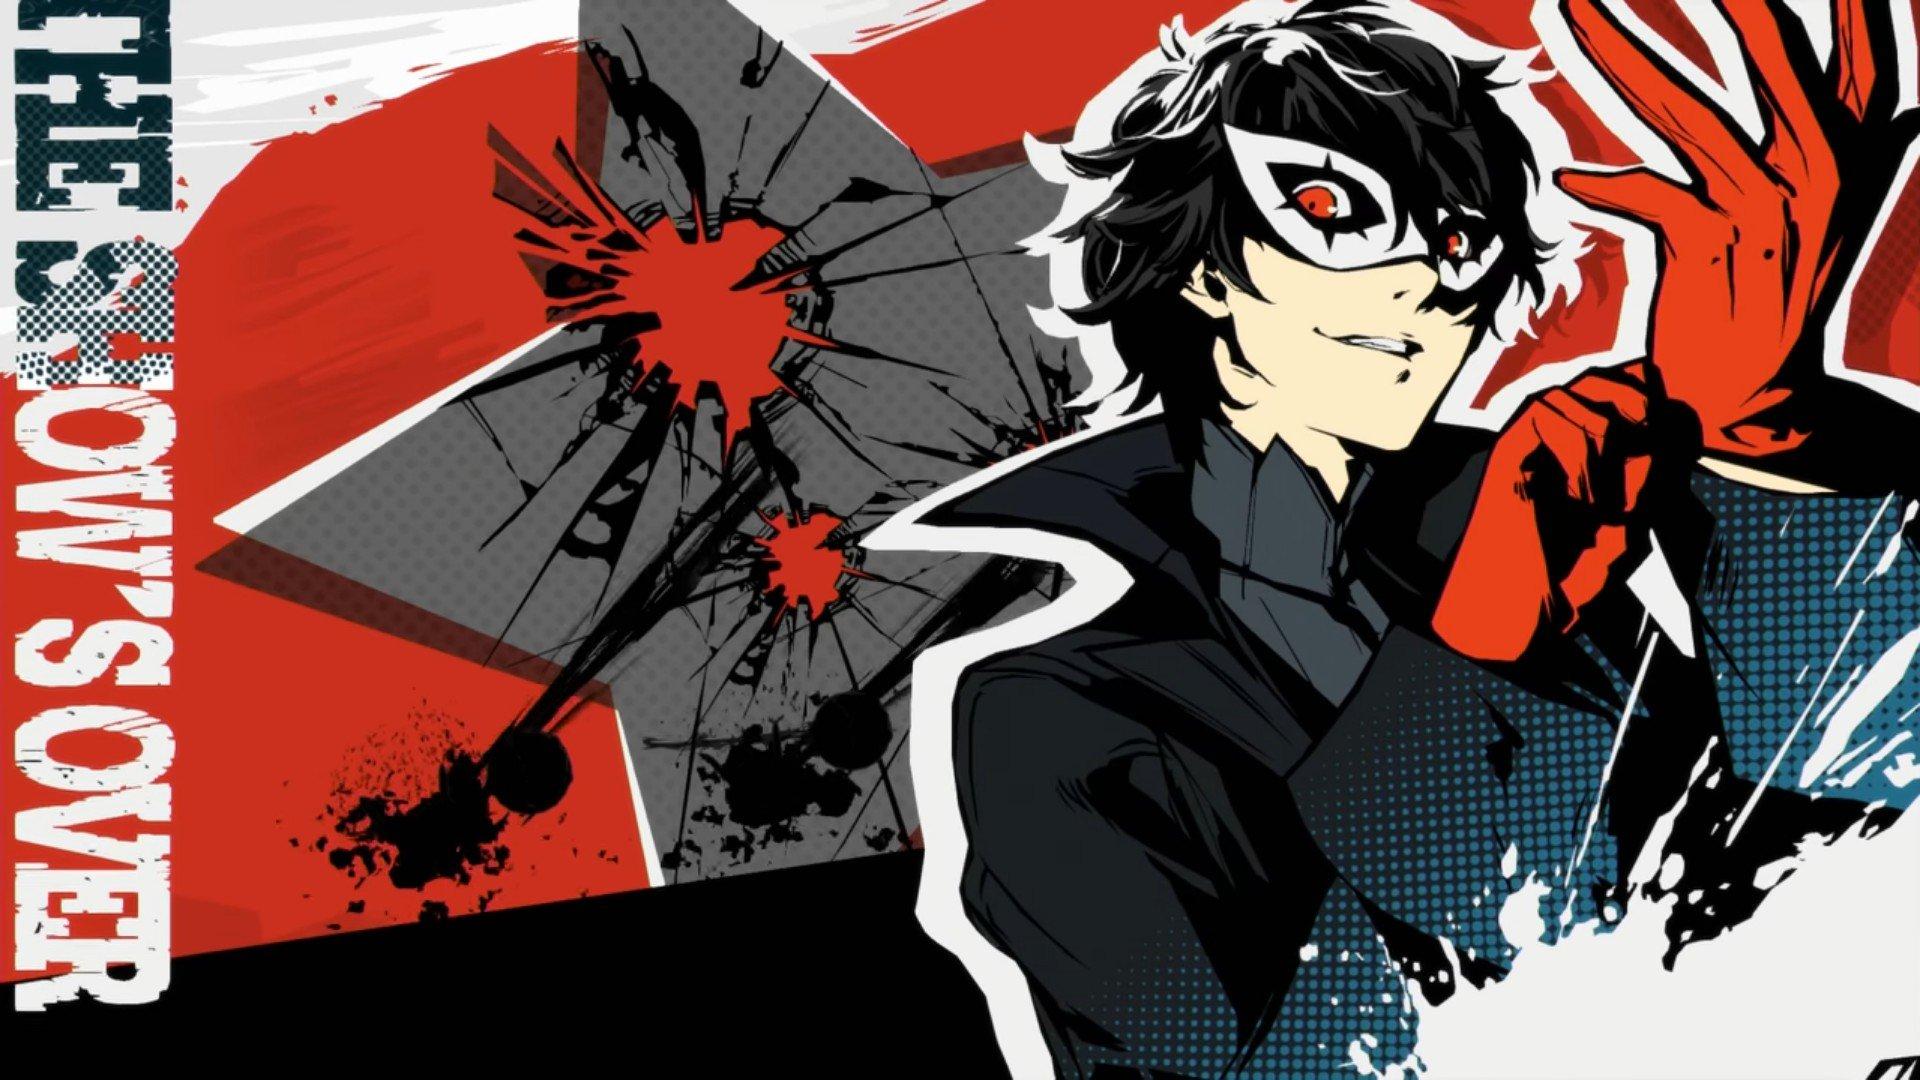 Review: Persona 5 – Destructoid